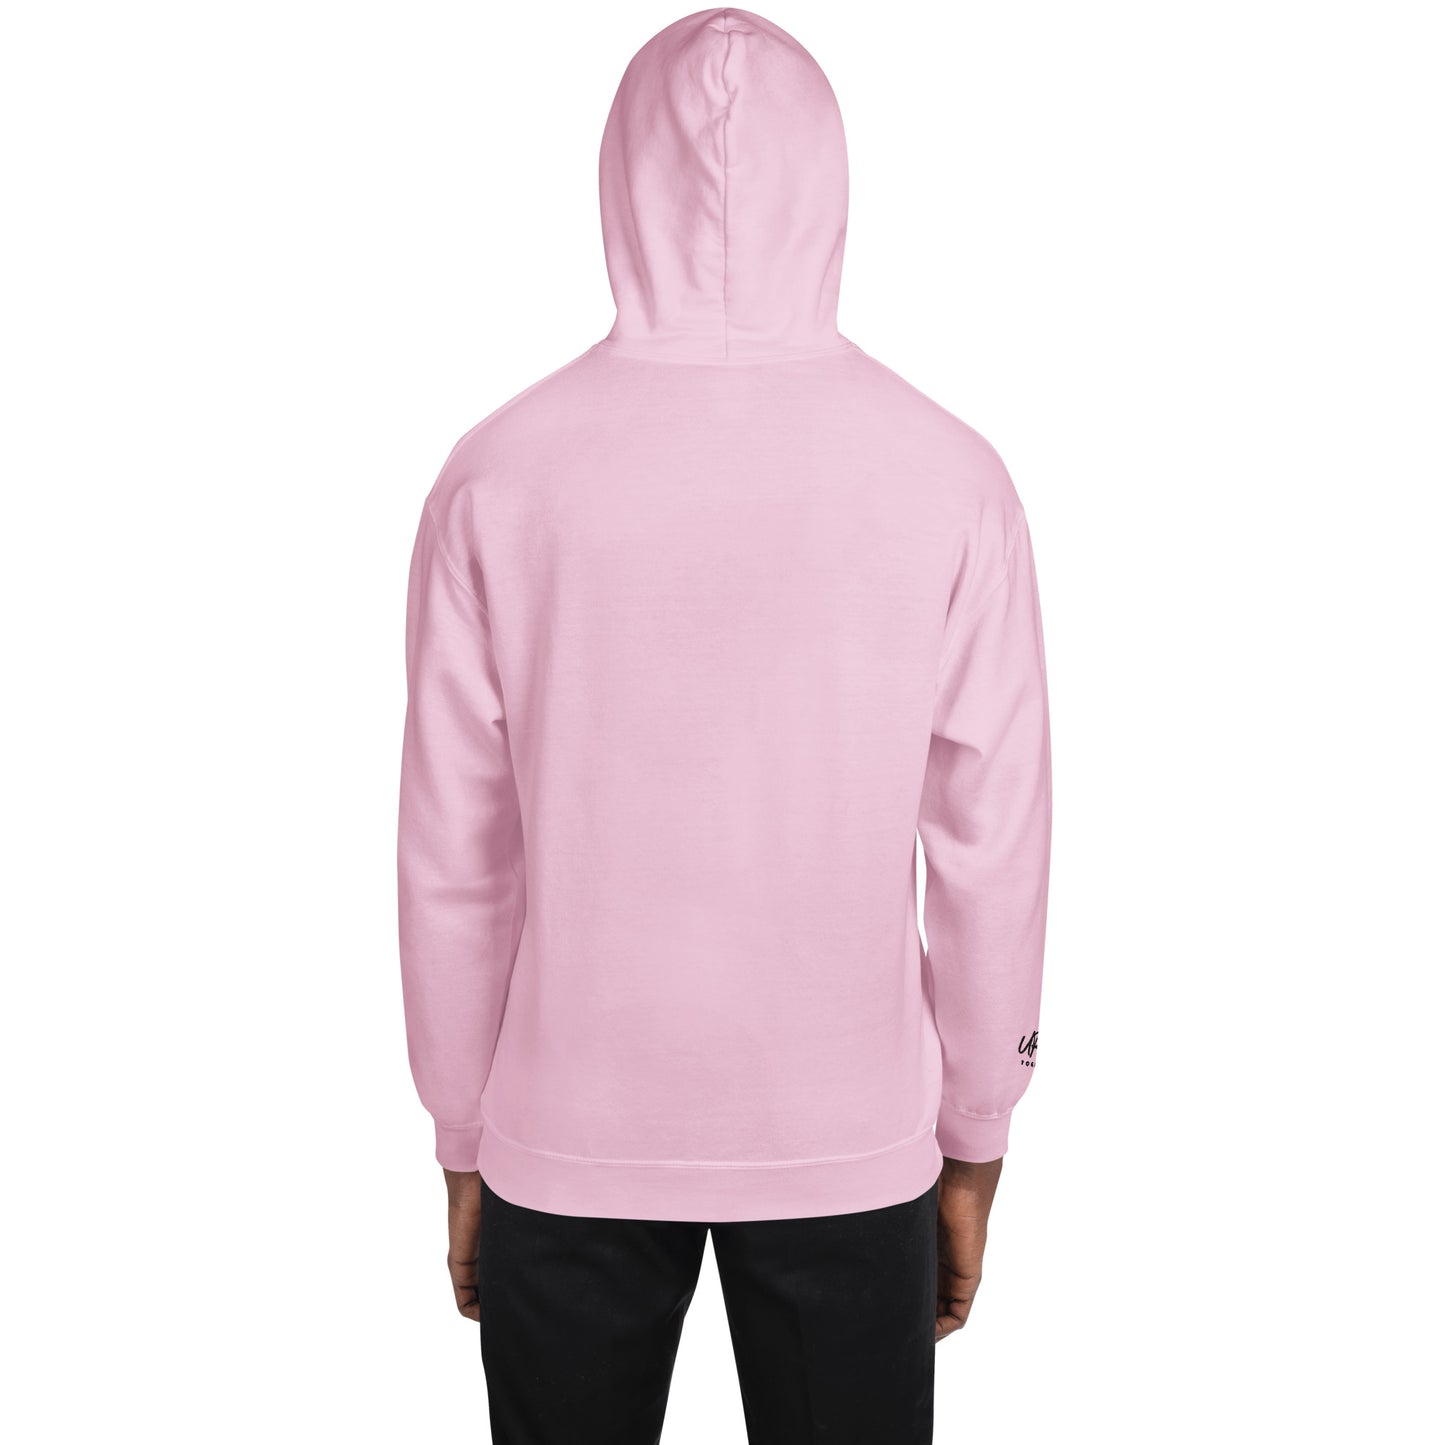 "URise Together" Embroidered Hoodie Pink